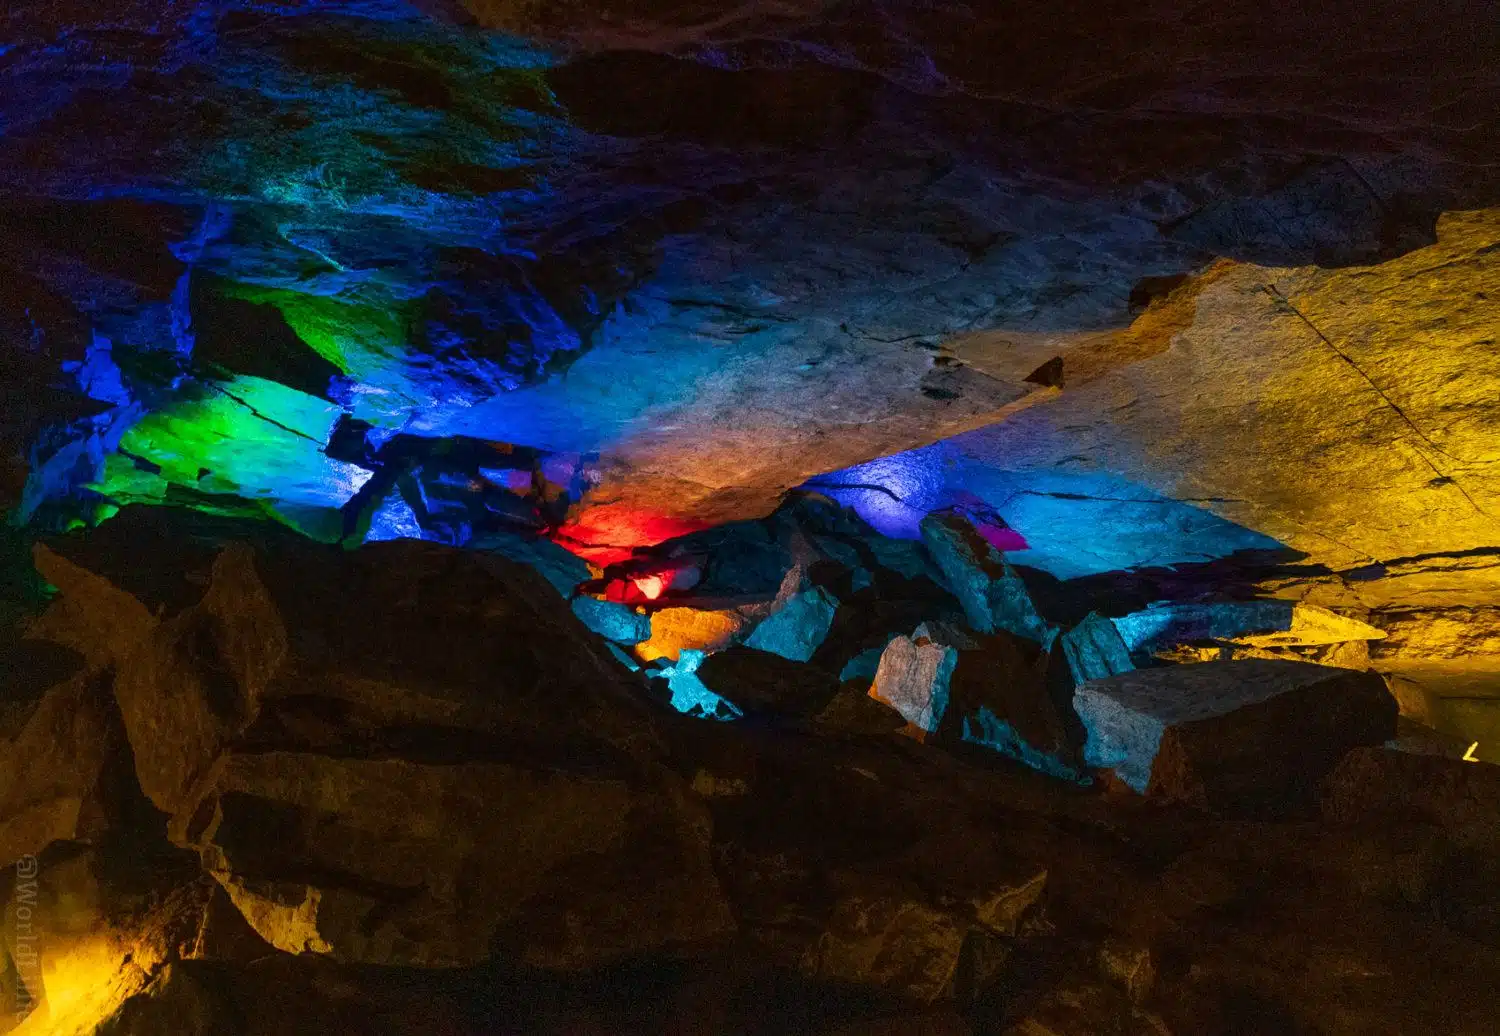 The colored lights are beautiful touch in the caverns.